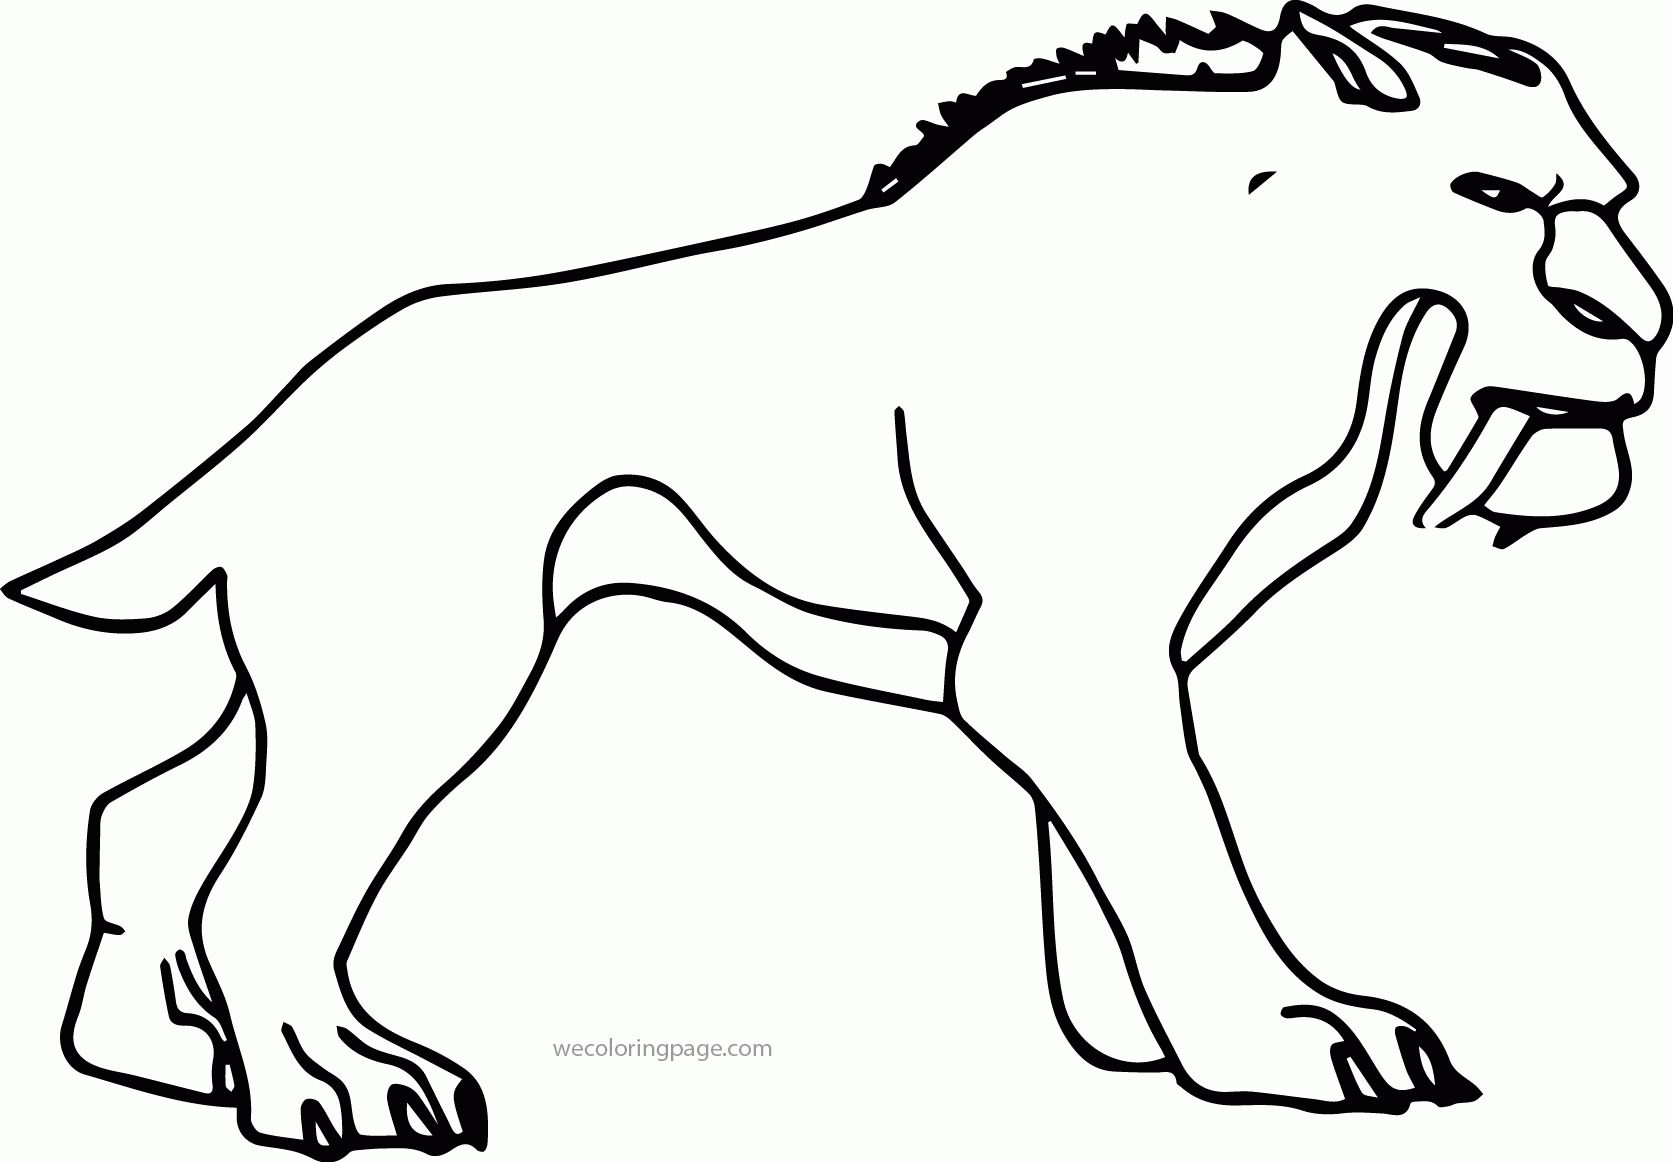 Ice Age Diego Coloring Page | Wecoloringpage